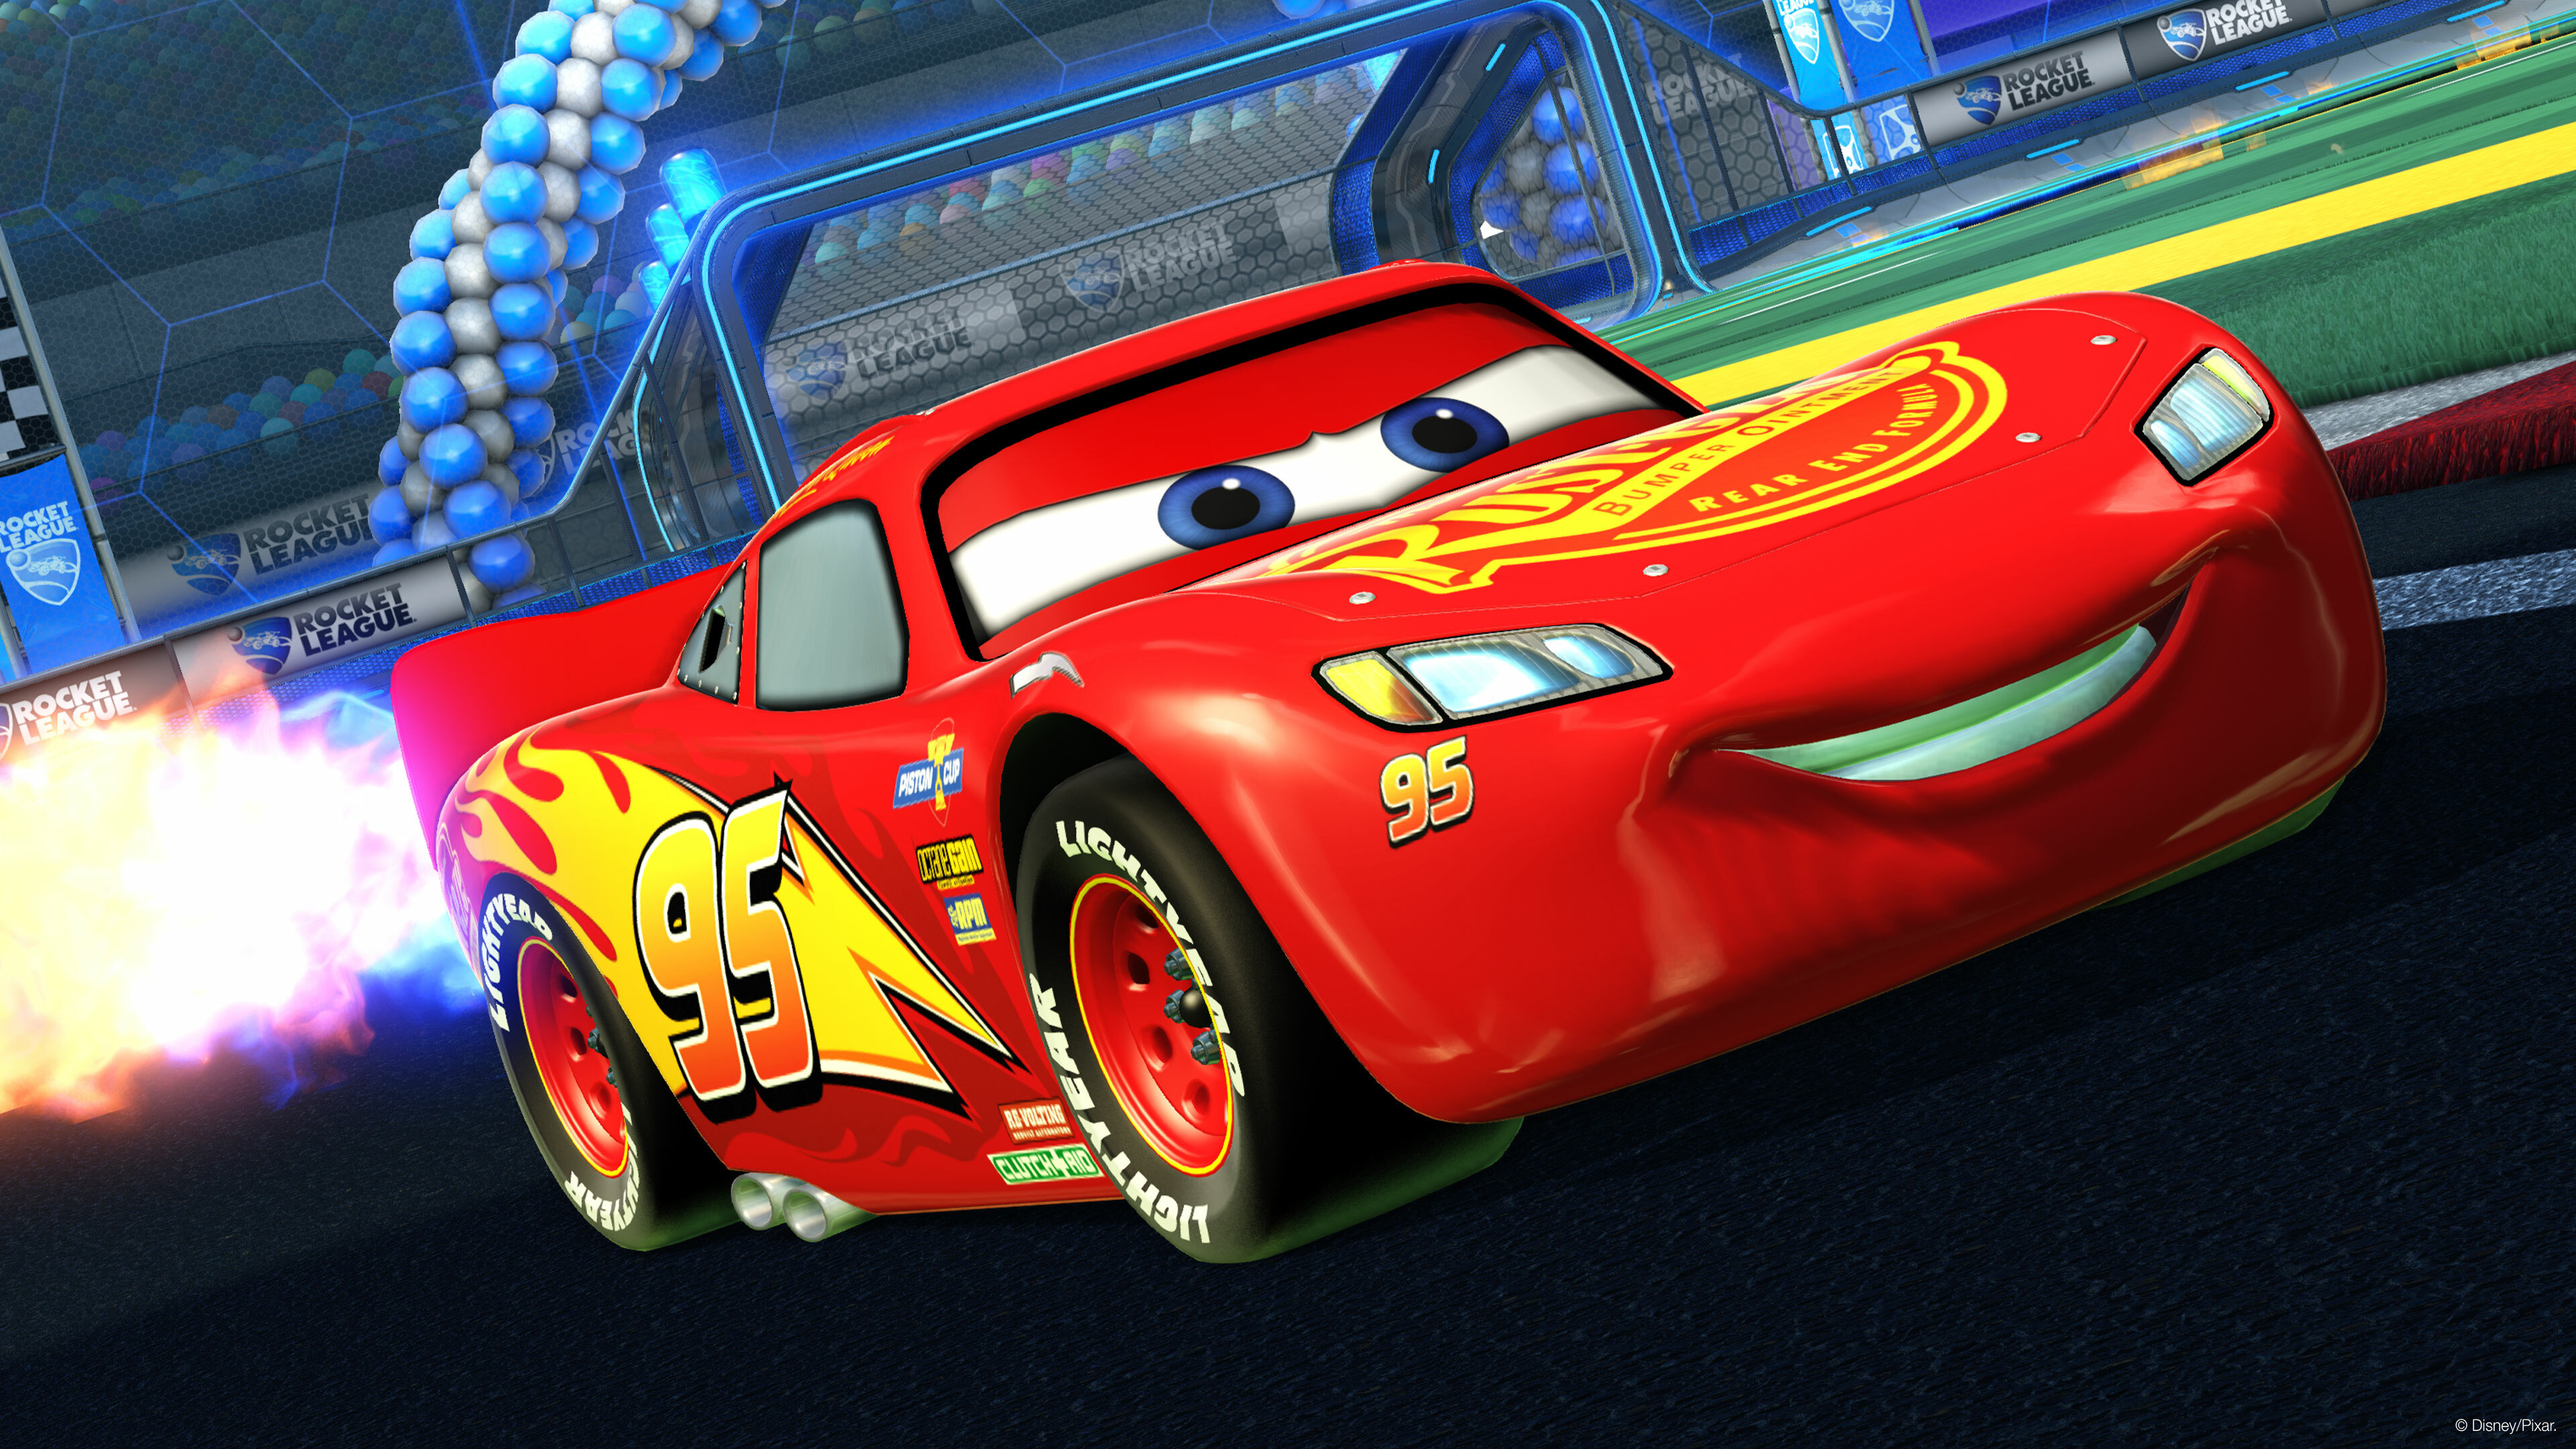 Behind The Thrills  New video boasts more about Lightning McQueen